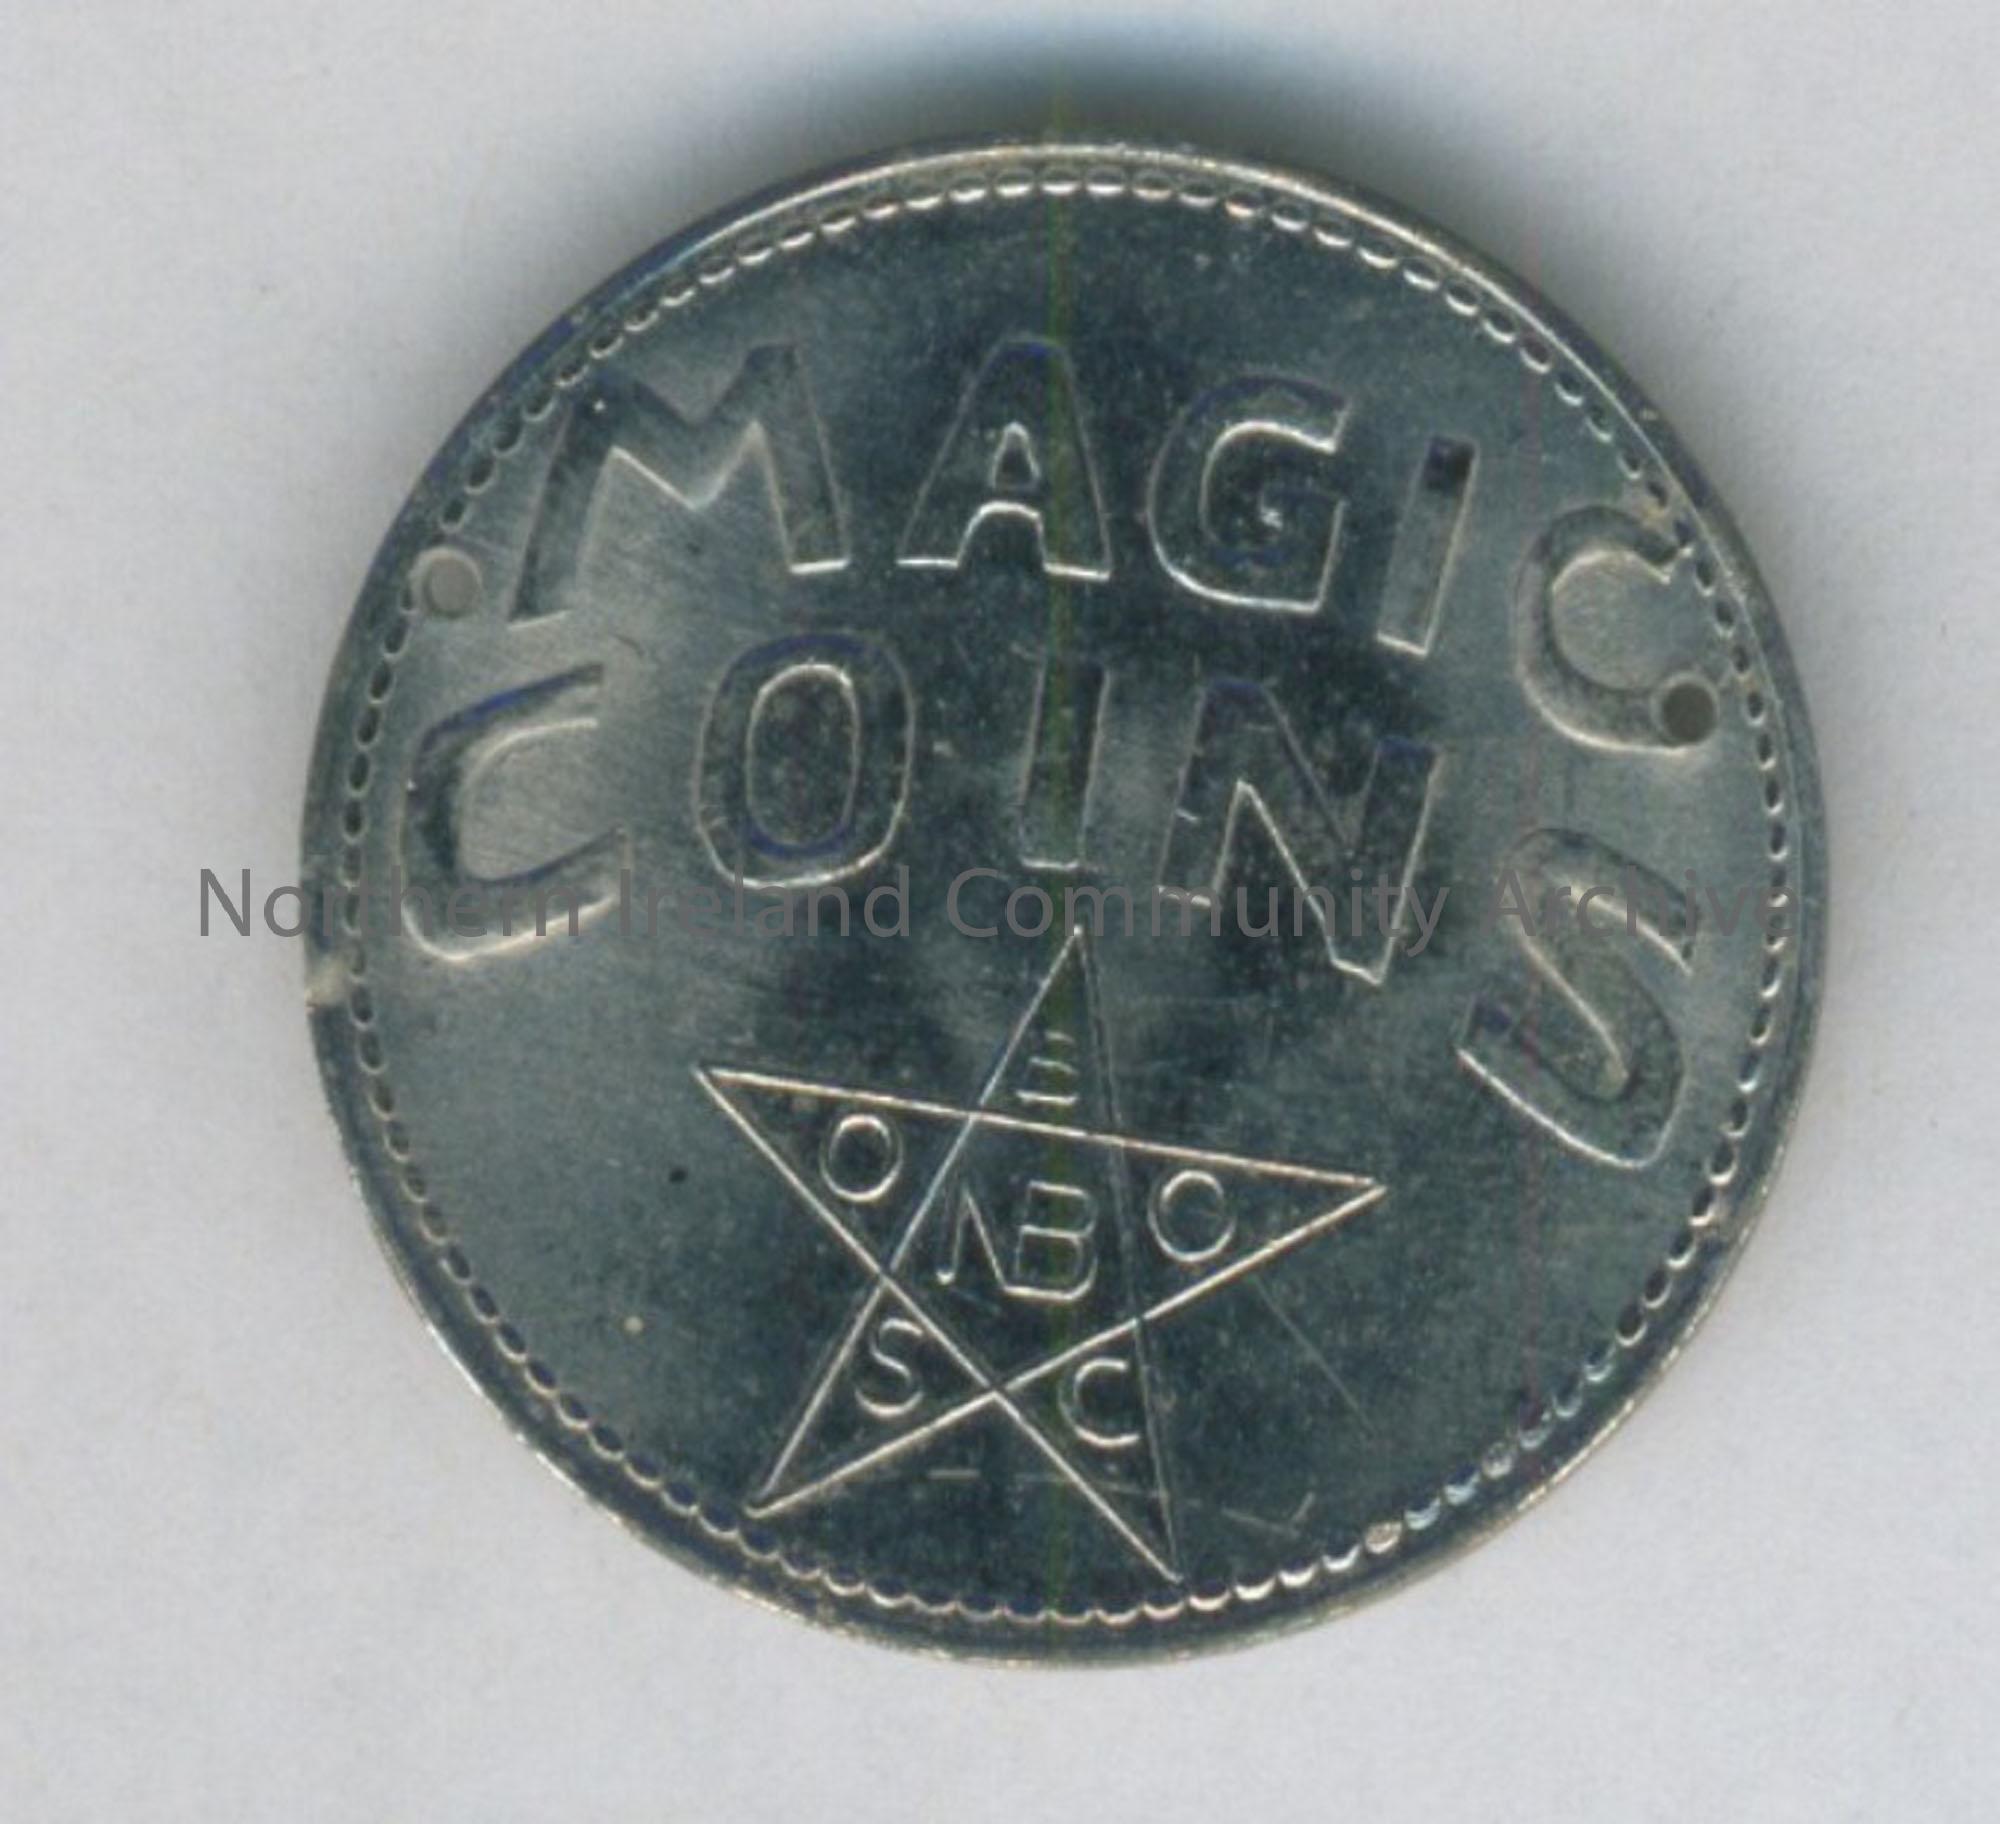 Two silver ‘magic’ coins